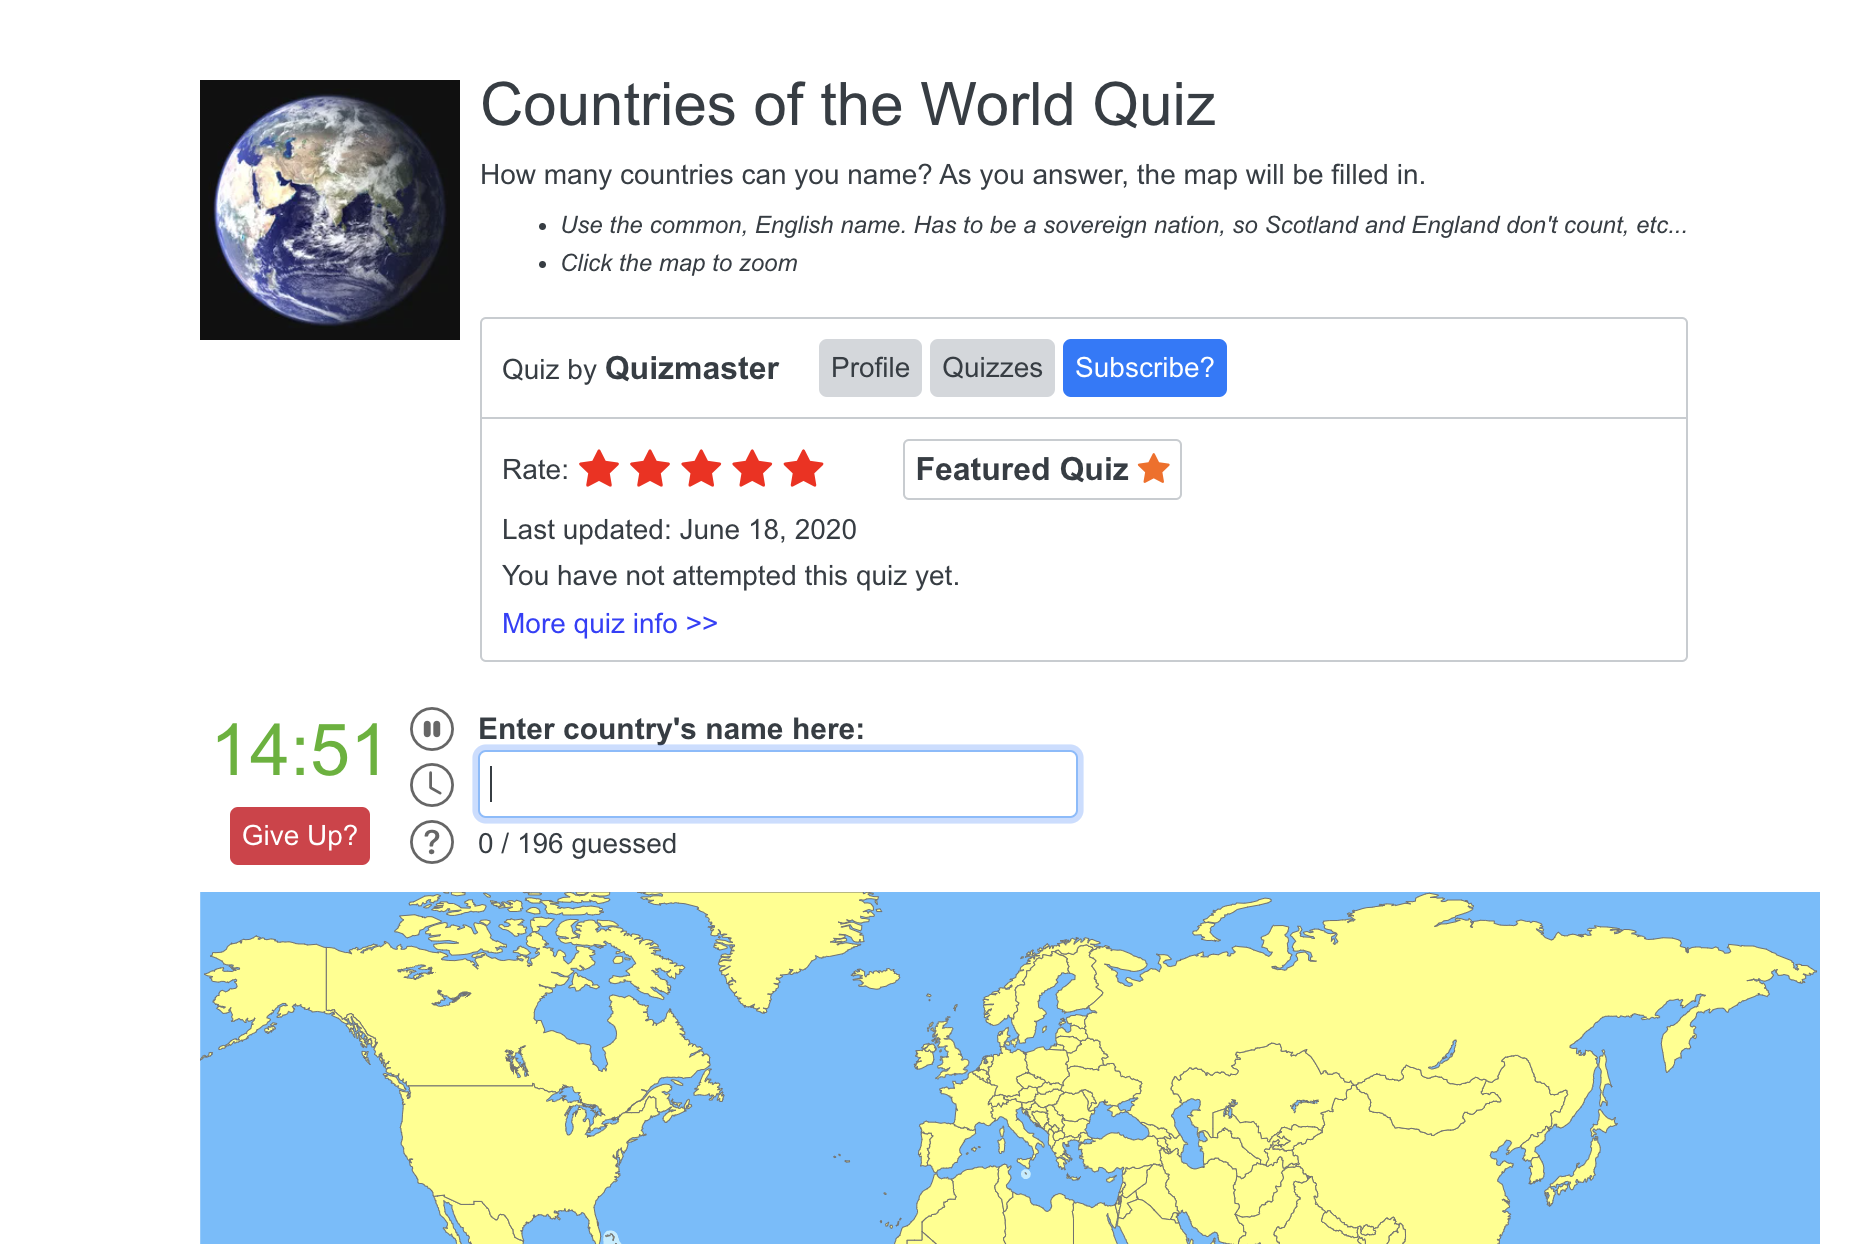 Jetpunk is a fun website where you can take timed quizzes to test your knowledge. 